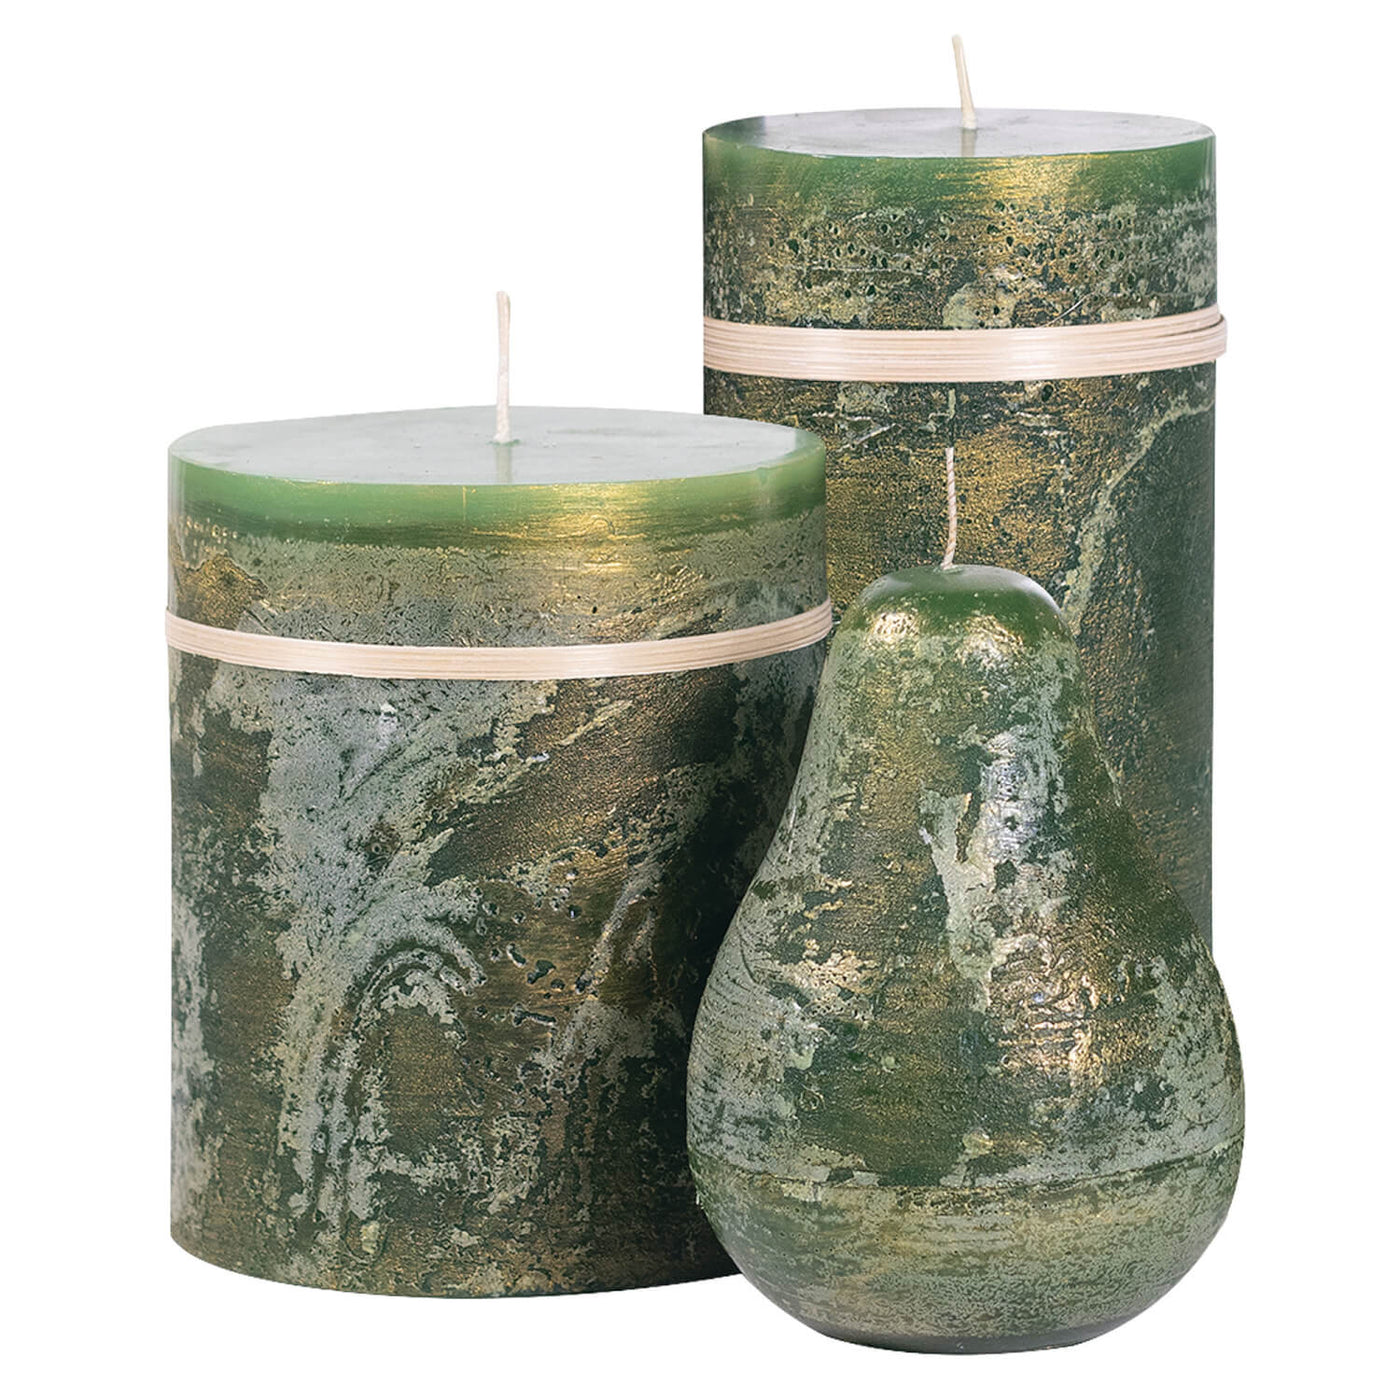 Green Vance Kitira Timber candle with brushed gold accents